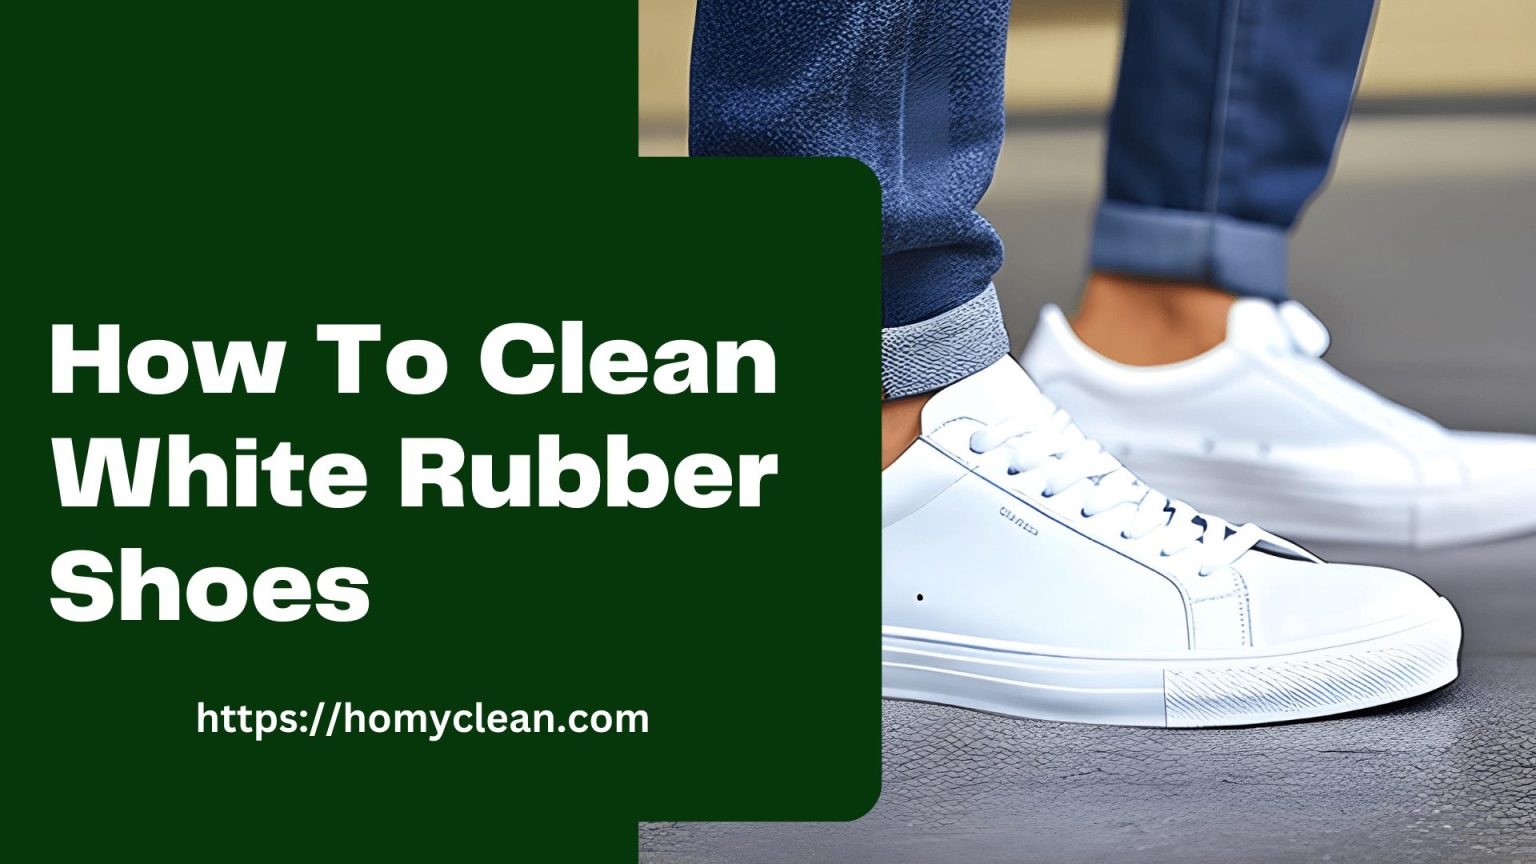 How To Clean White Rubber Shoes - Tip for Spotless Sneakers